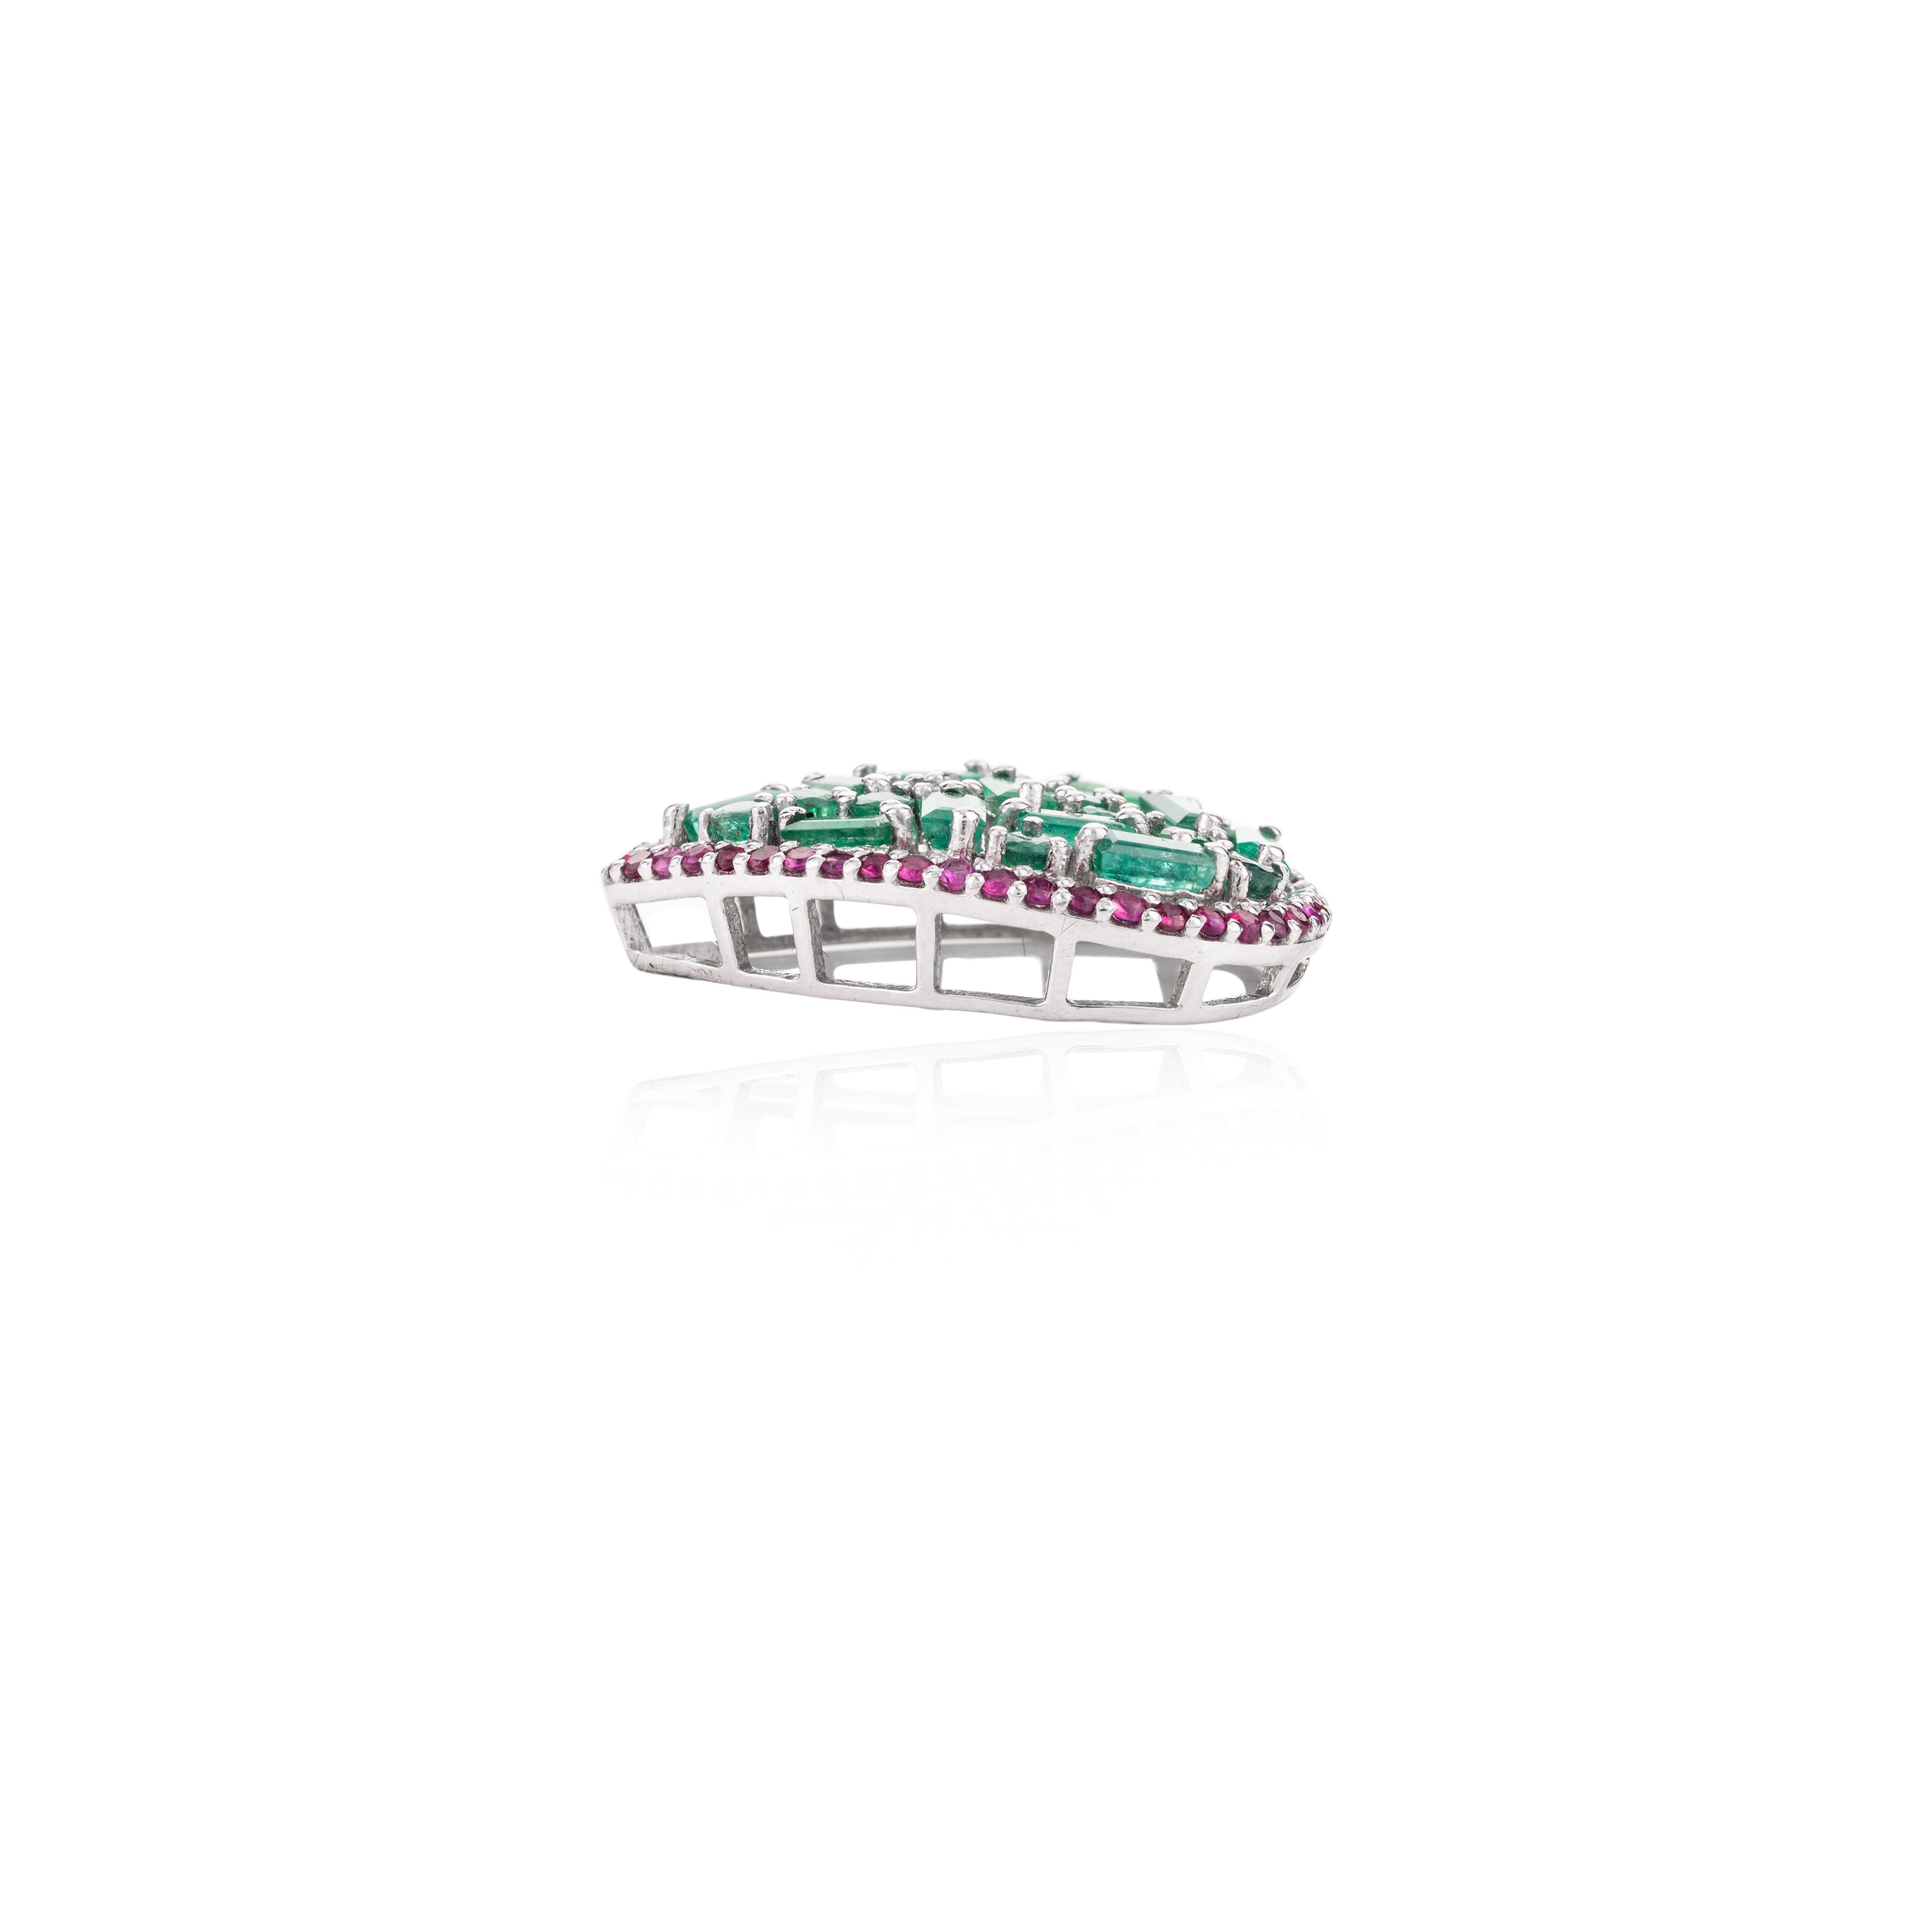 Mixed Cut Statement Emerald Ruby Cluster Brooch Pin in Sterling Silver